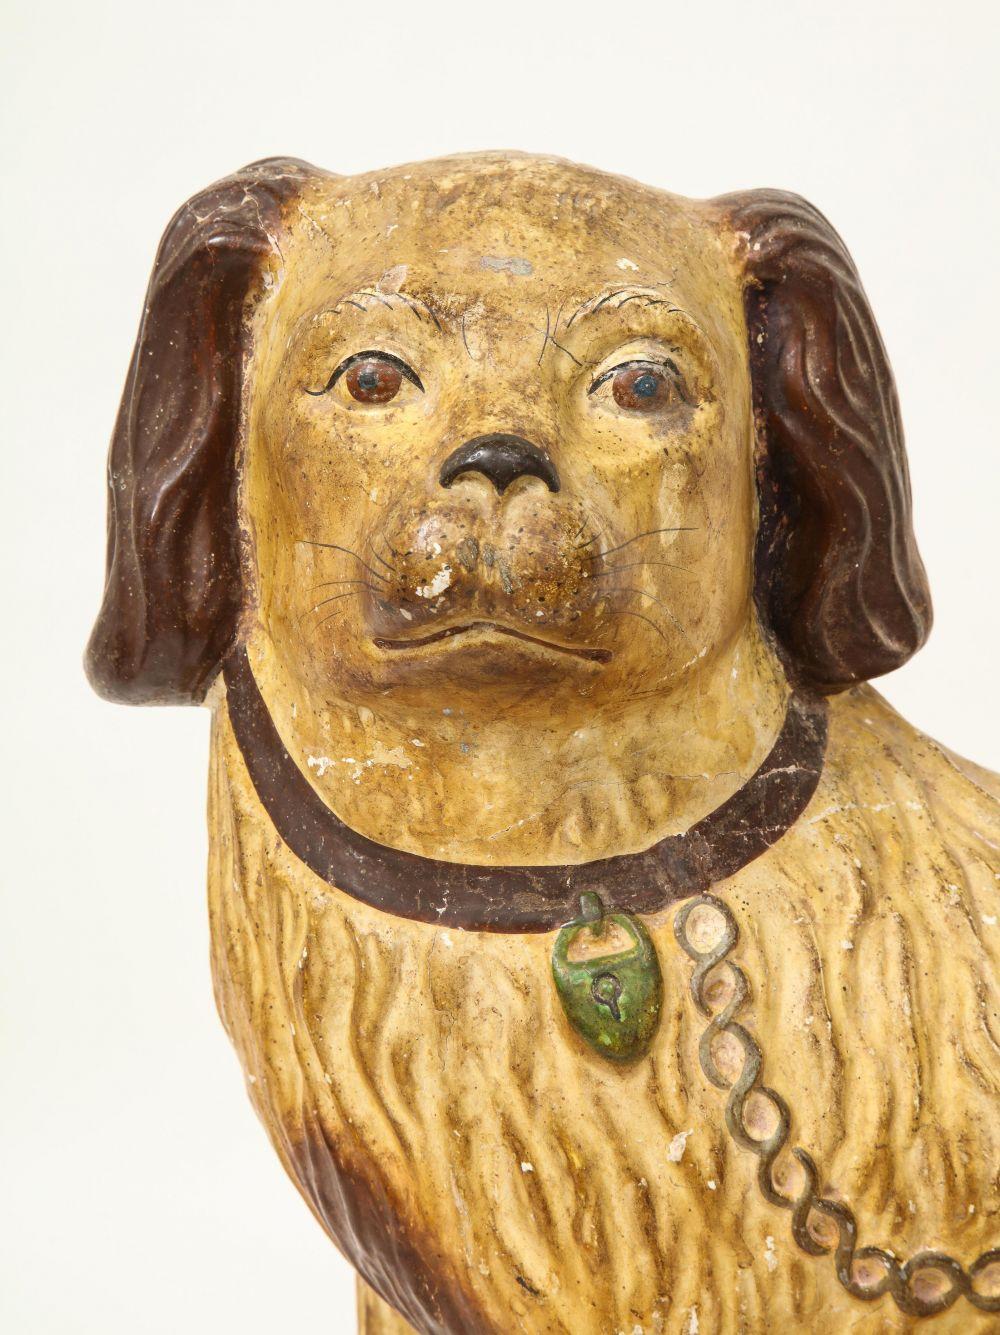 Charming figure of a spaniel cast from Staffordshire ceramic molds and handpainted in water-based pigments. Chalkware is made from plaster of Paris and was used to create inexpensive versions of decorative objects.